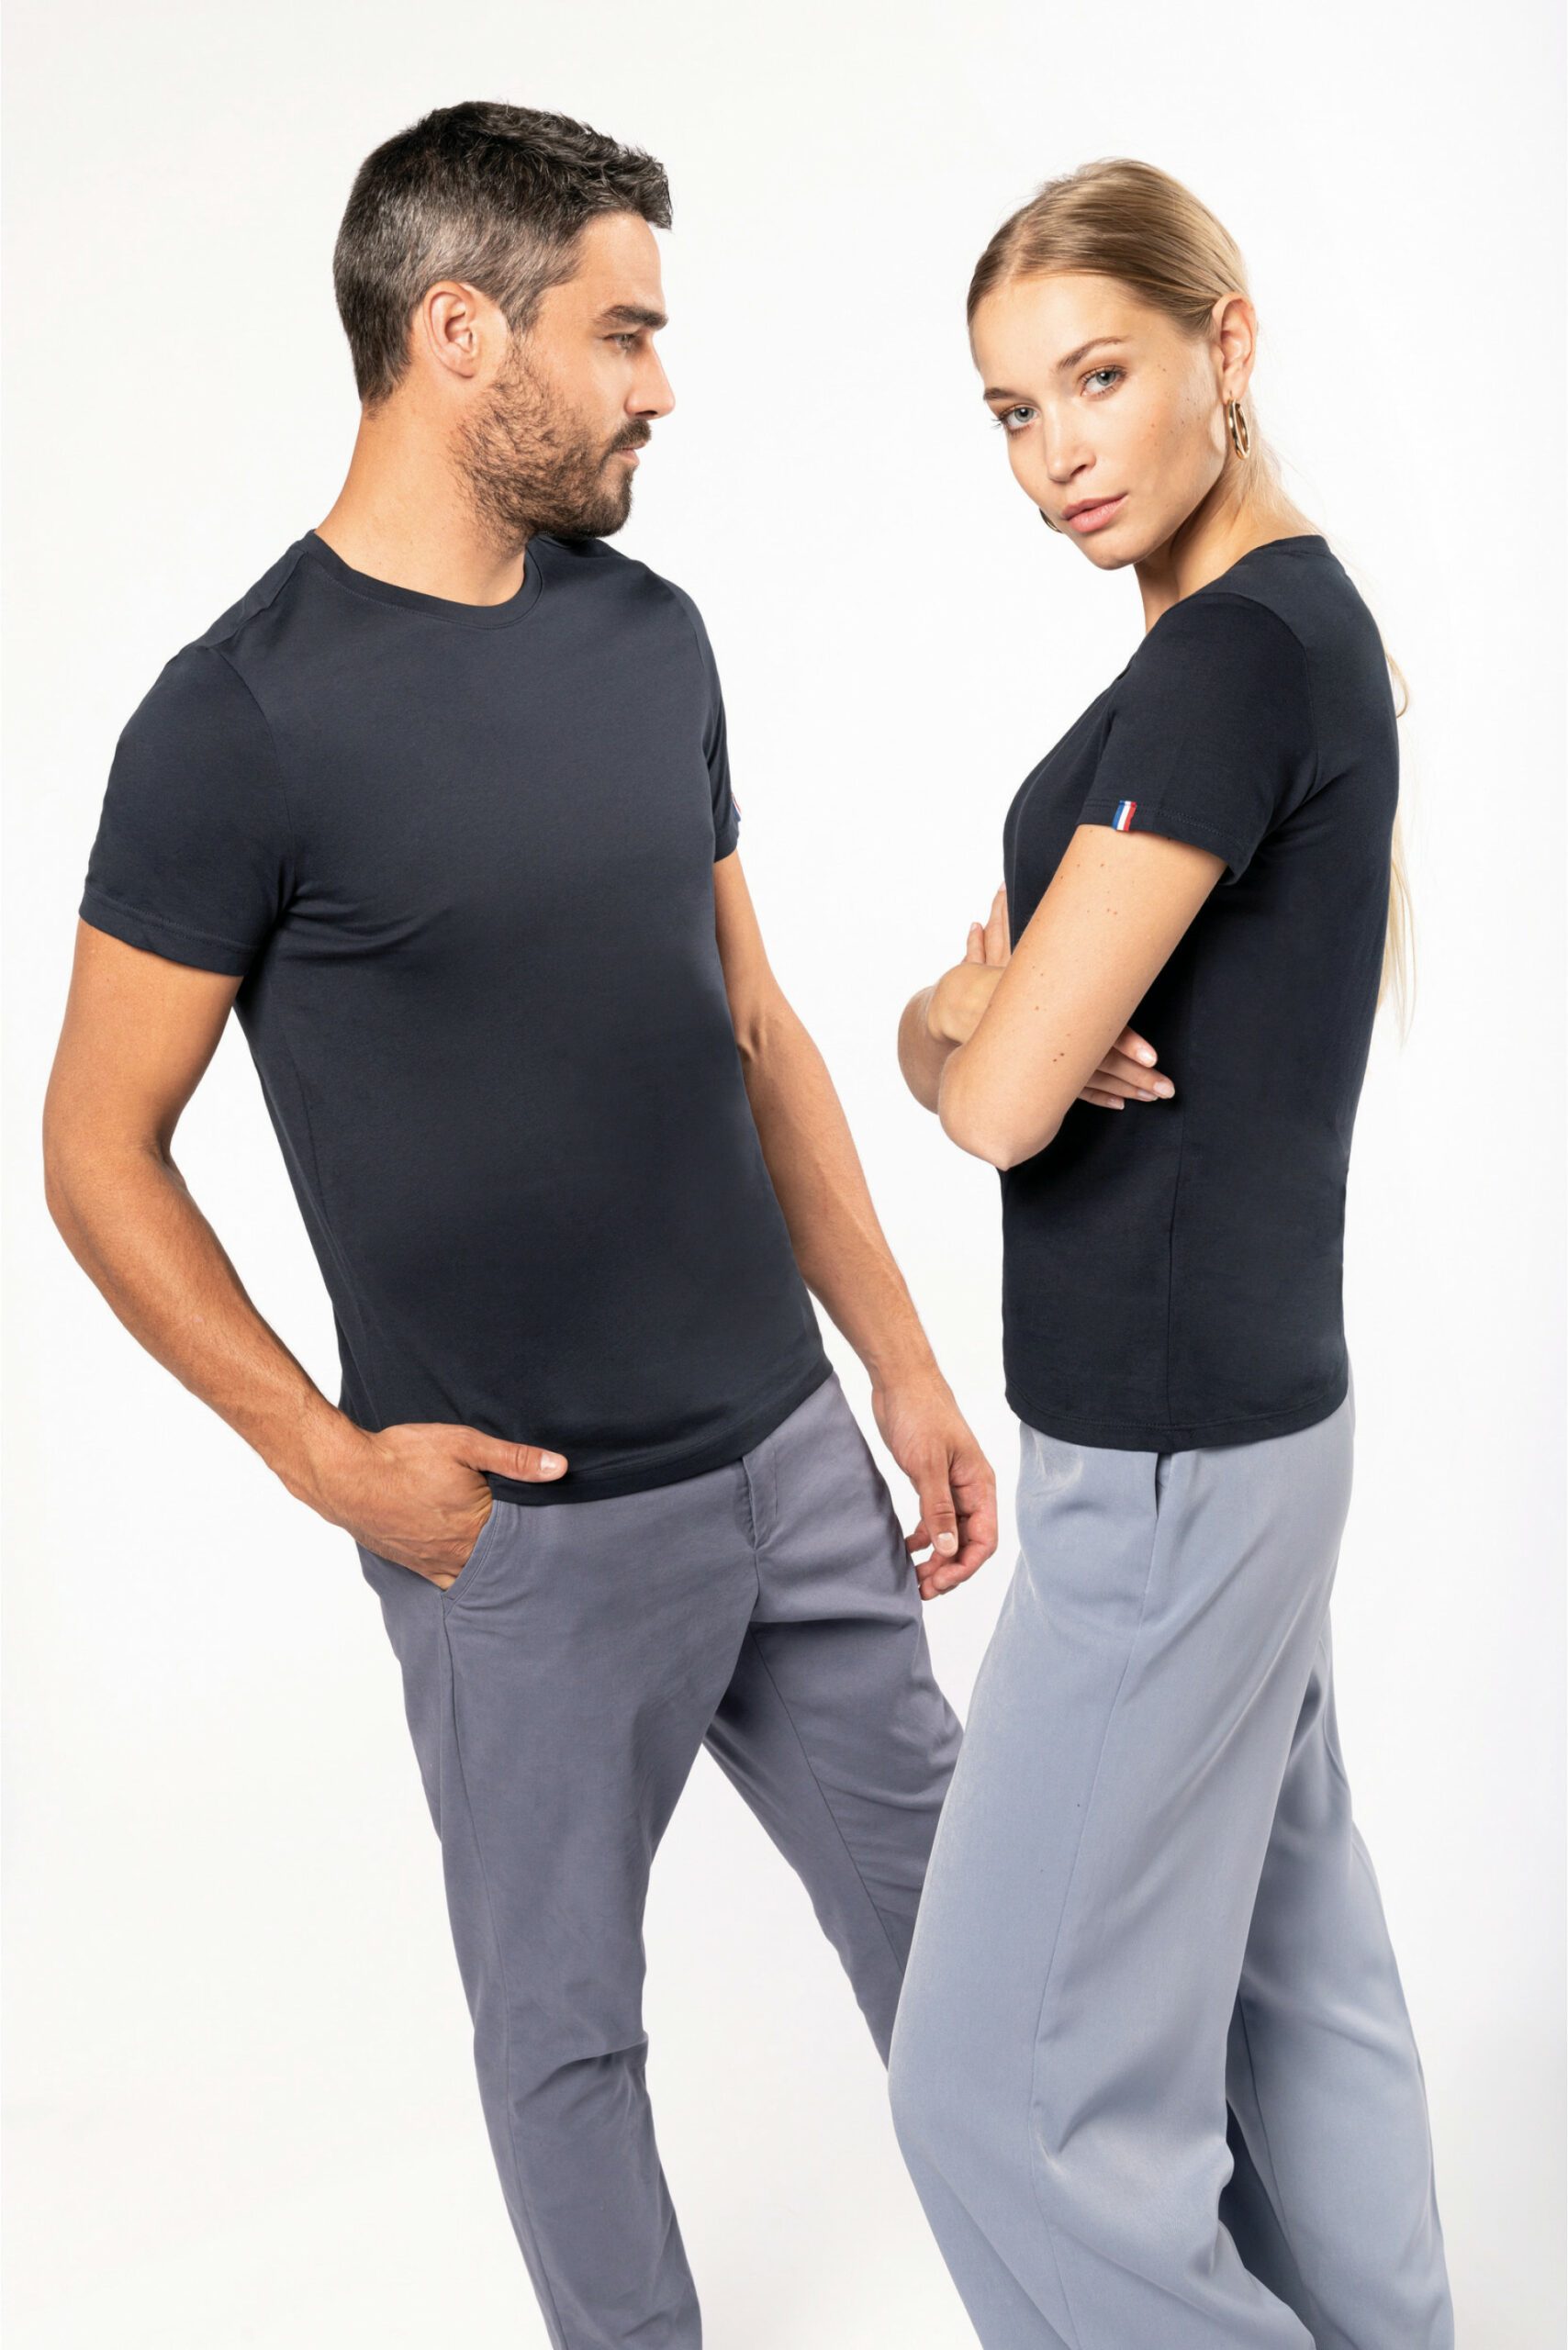 T-shirts marines Made in France homme et femme